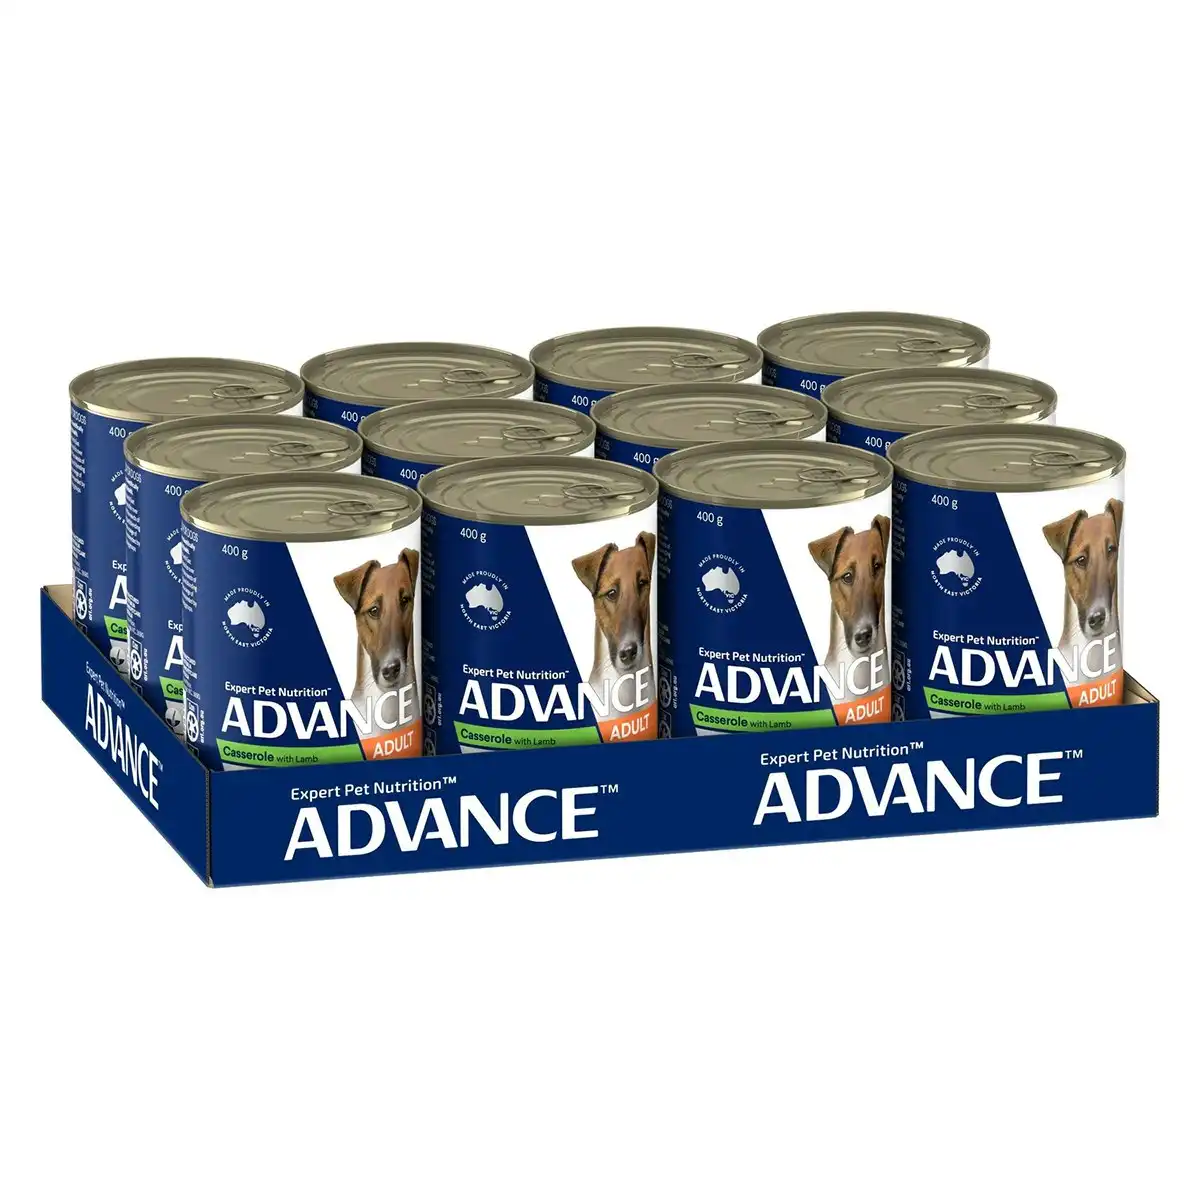 ADVANCE Adult All Breed Chicken Casserole Wet Dog Food (400G*12) 1 Pack